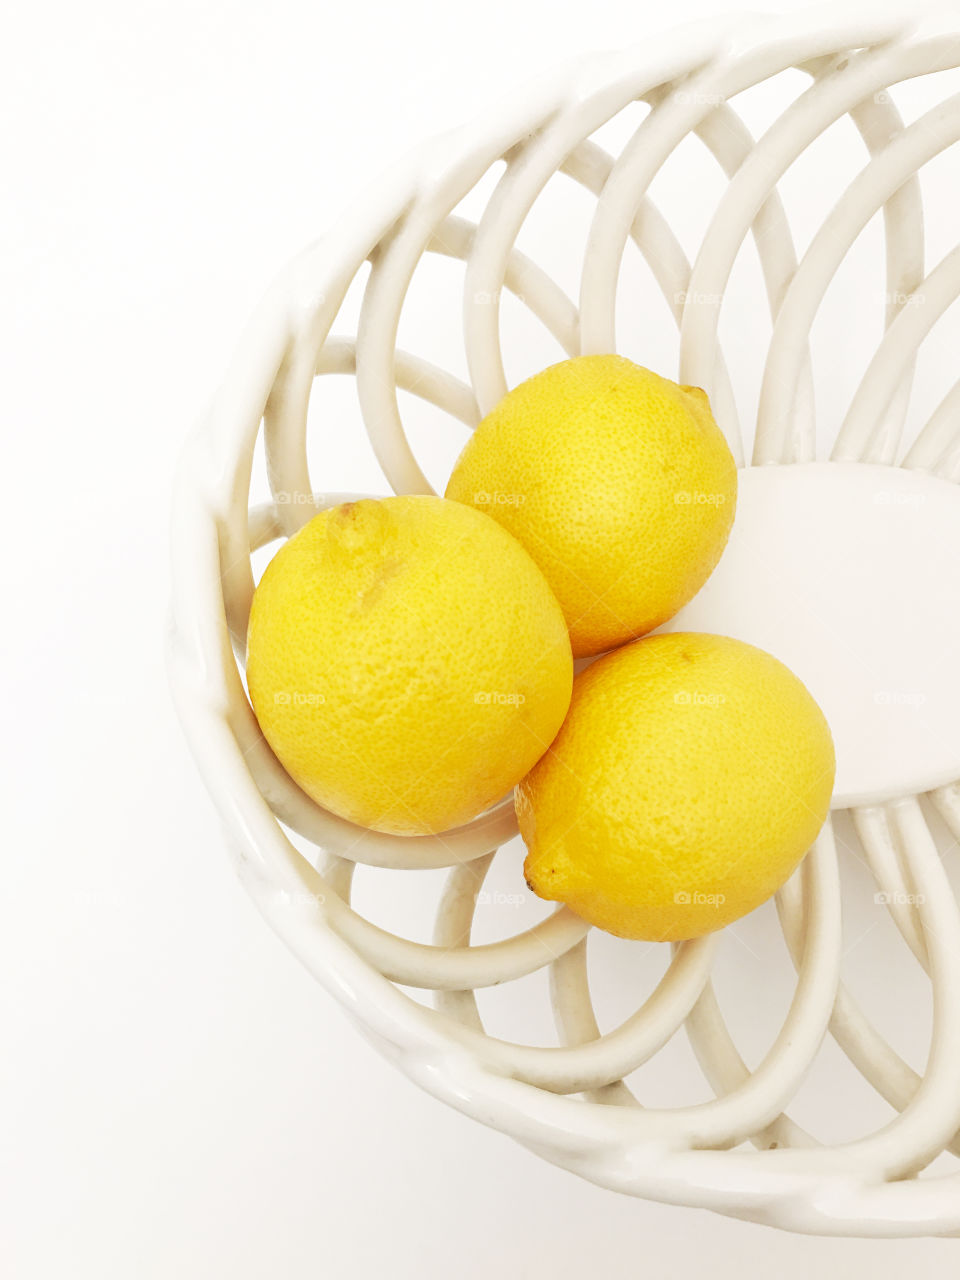 Looking down on a white bowl with three lemons!